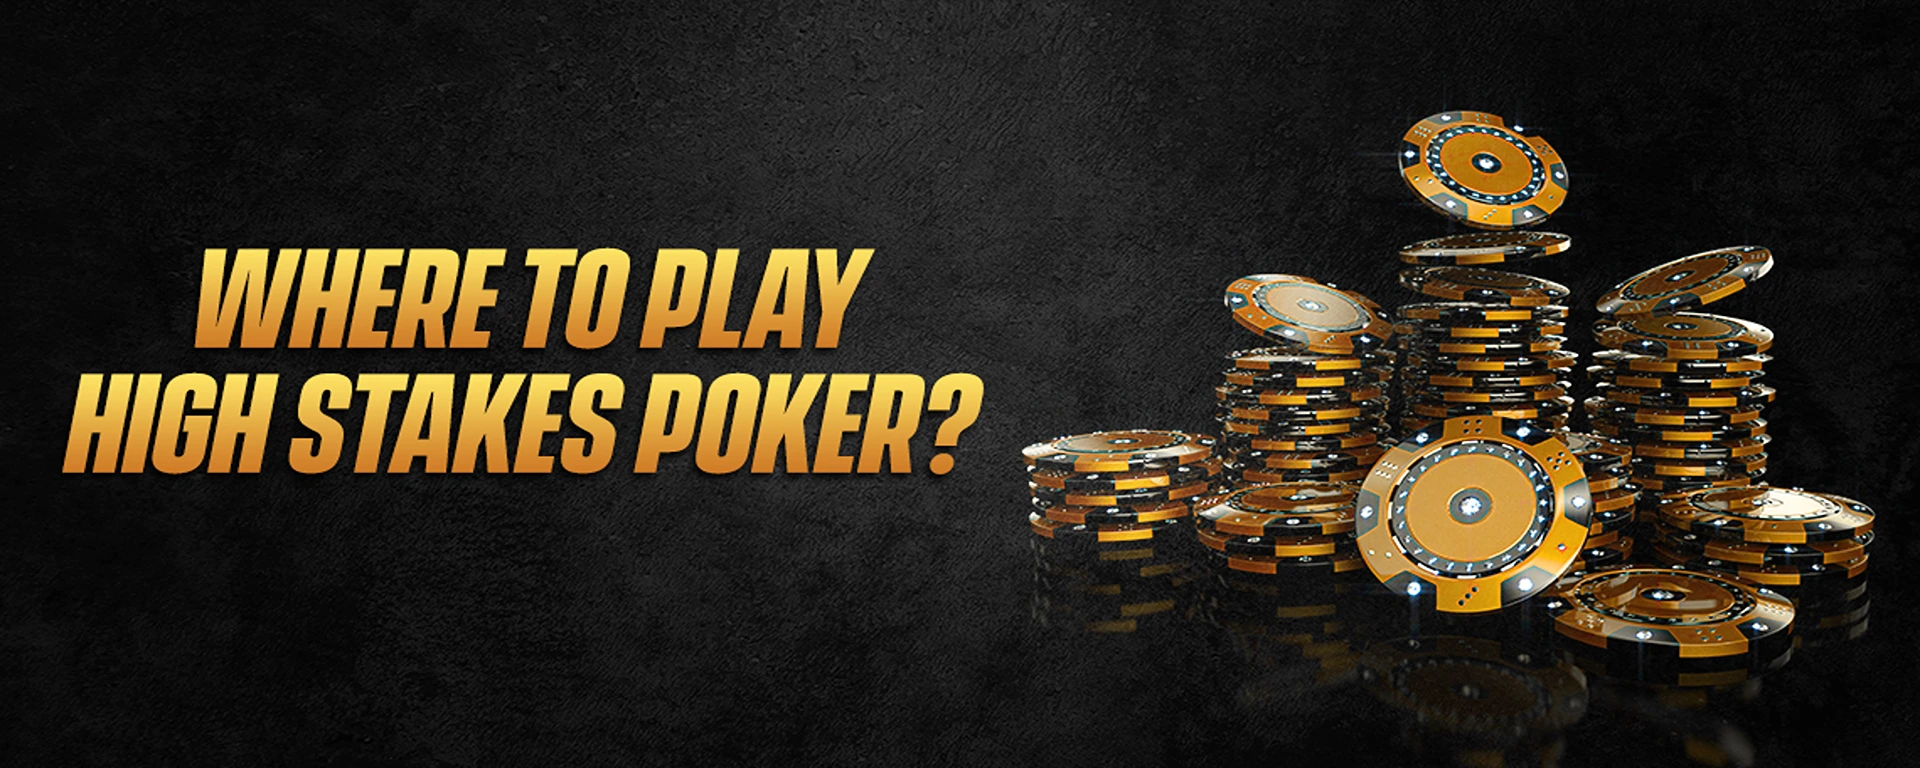 Where-to-Play-High-Stakes-Poker-Online.webp